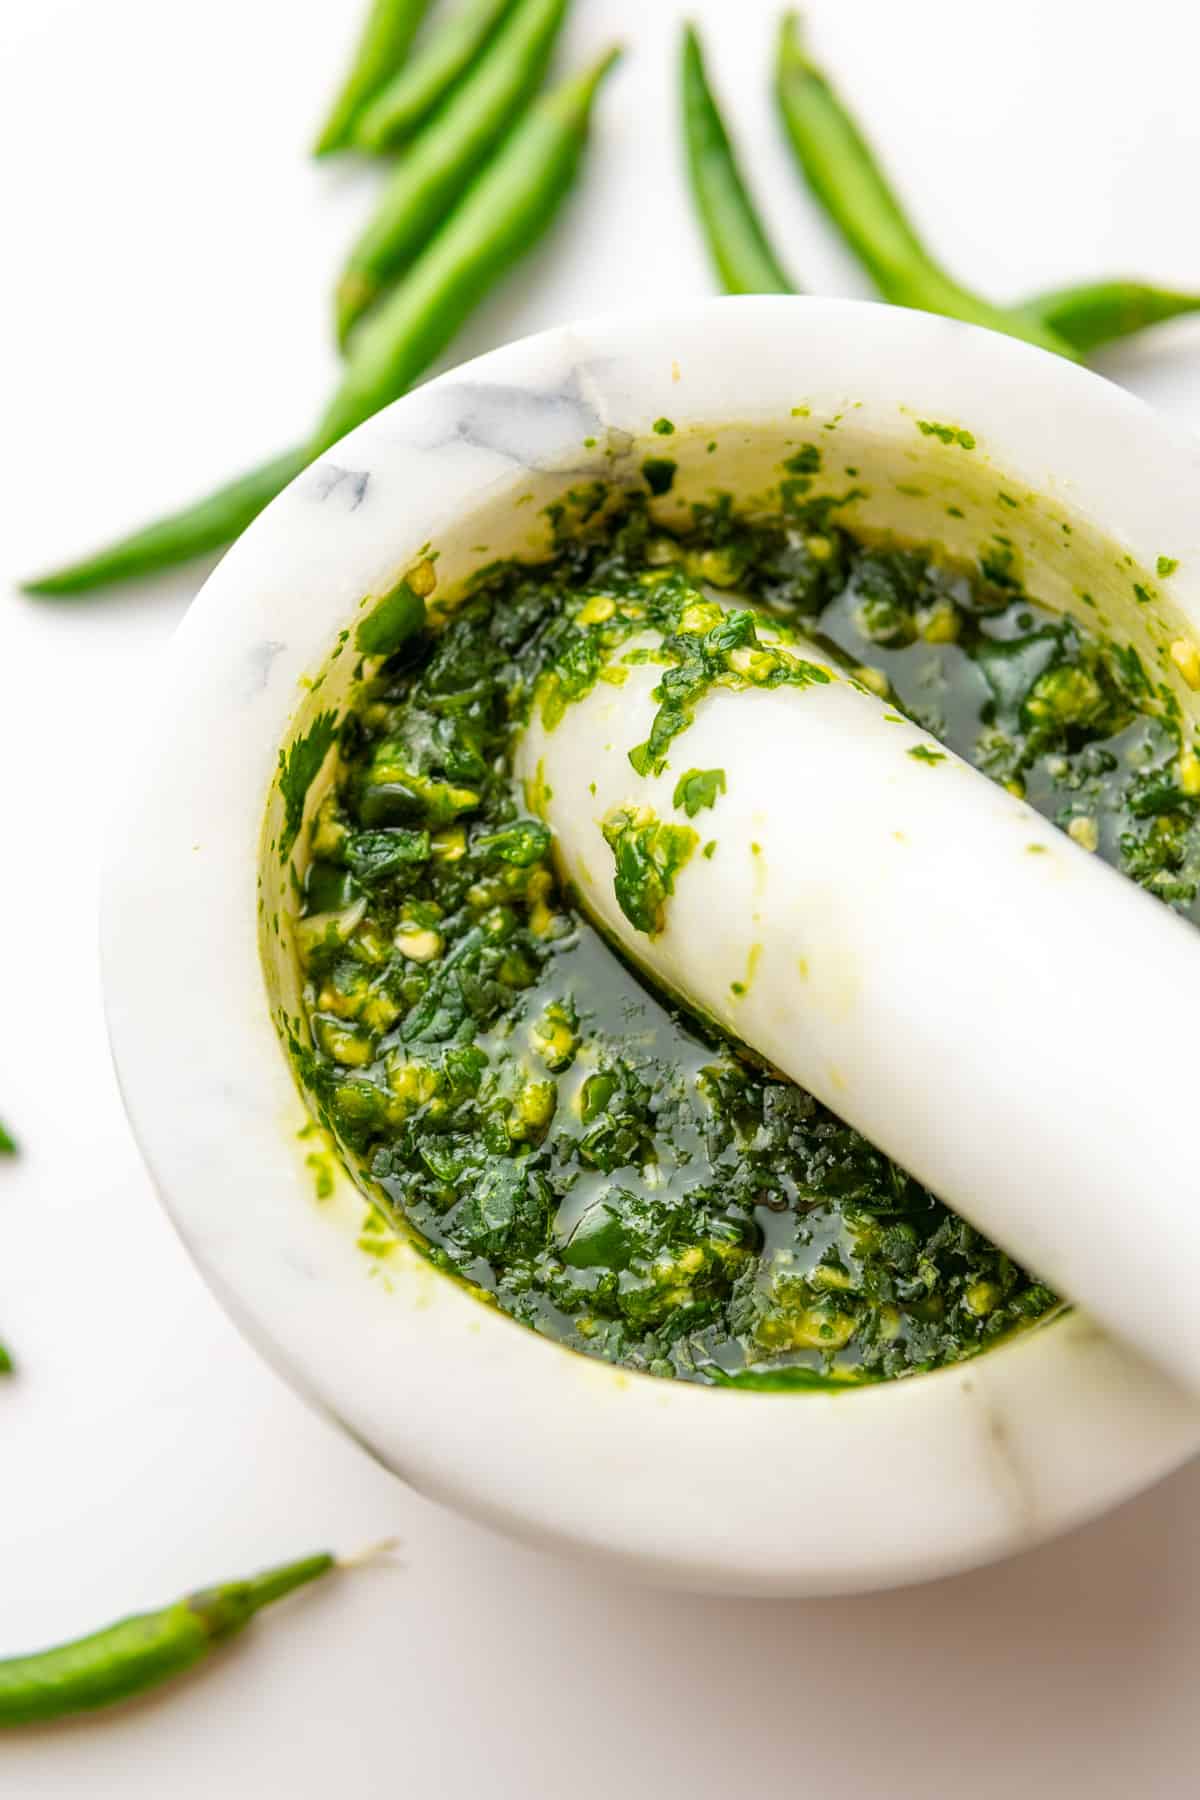 Spicy green chili sauce in a mortar and pestle with fresh chillies around the mortar.